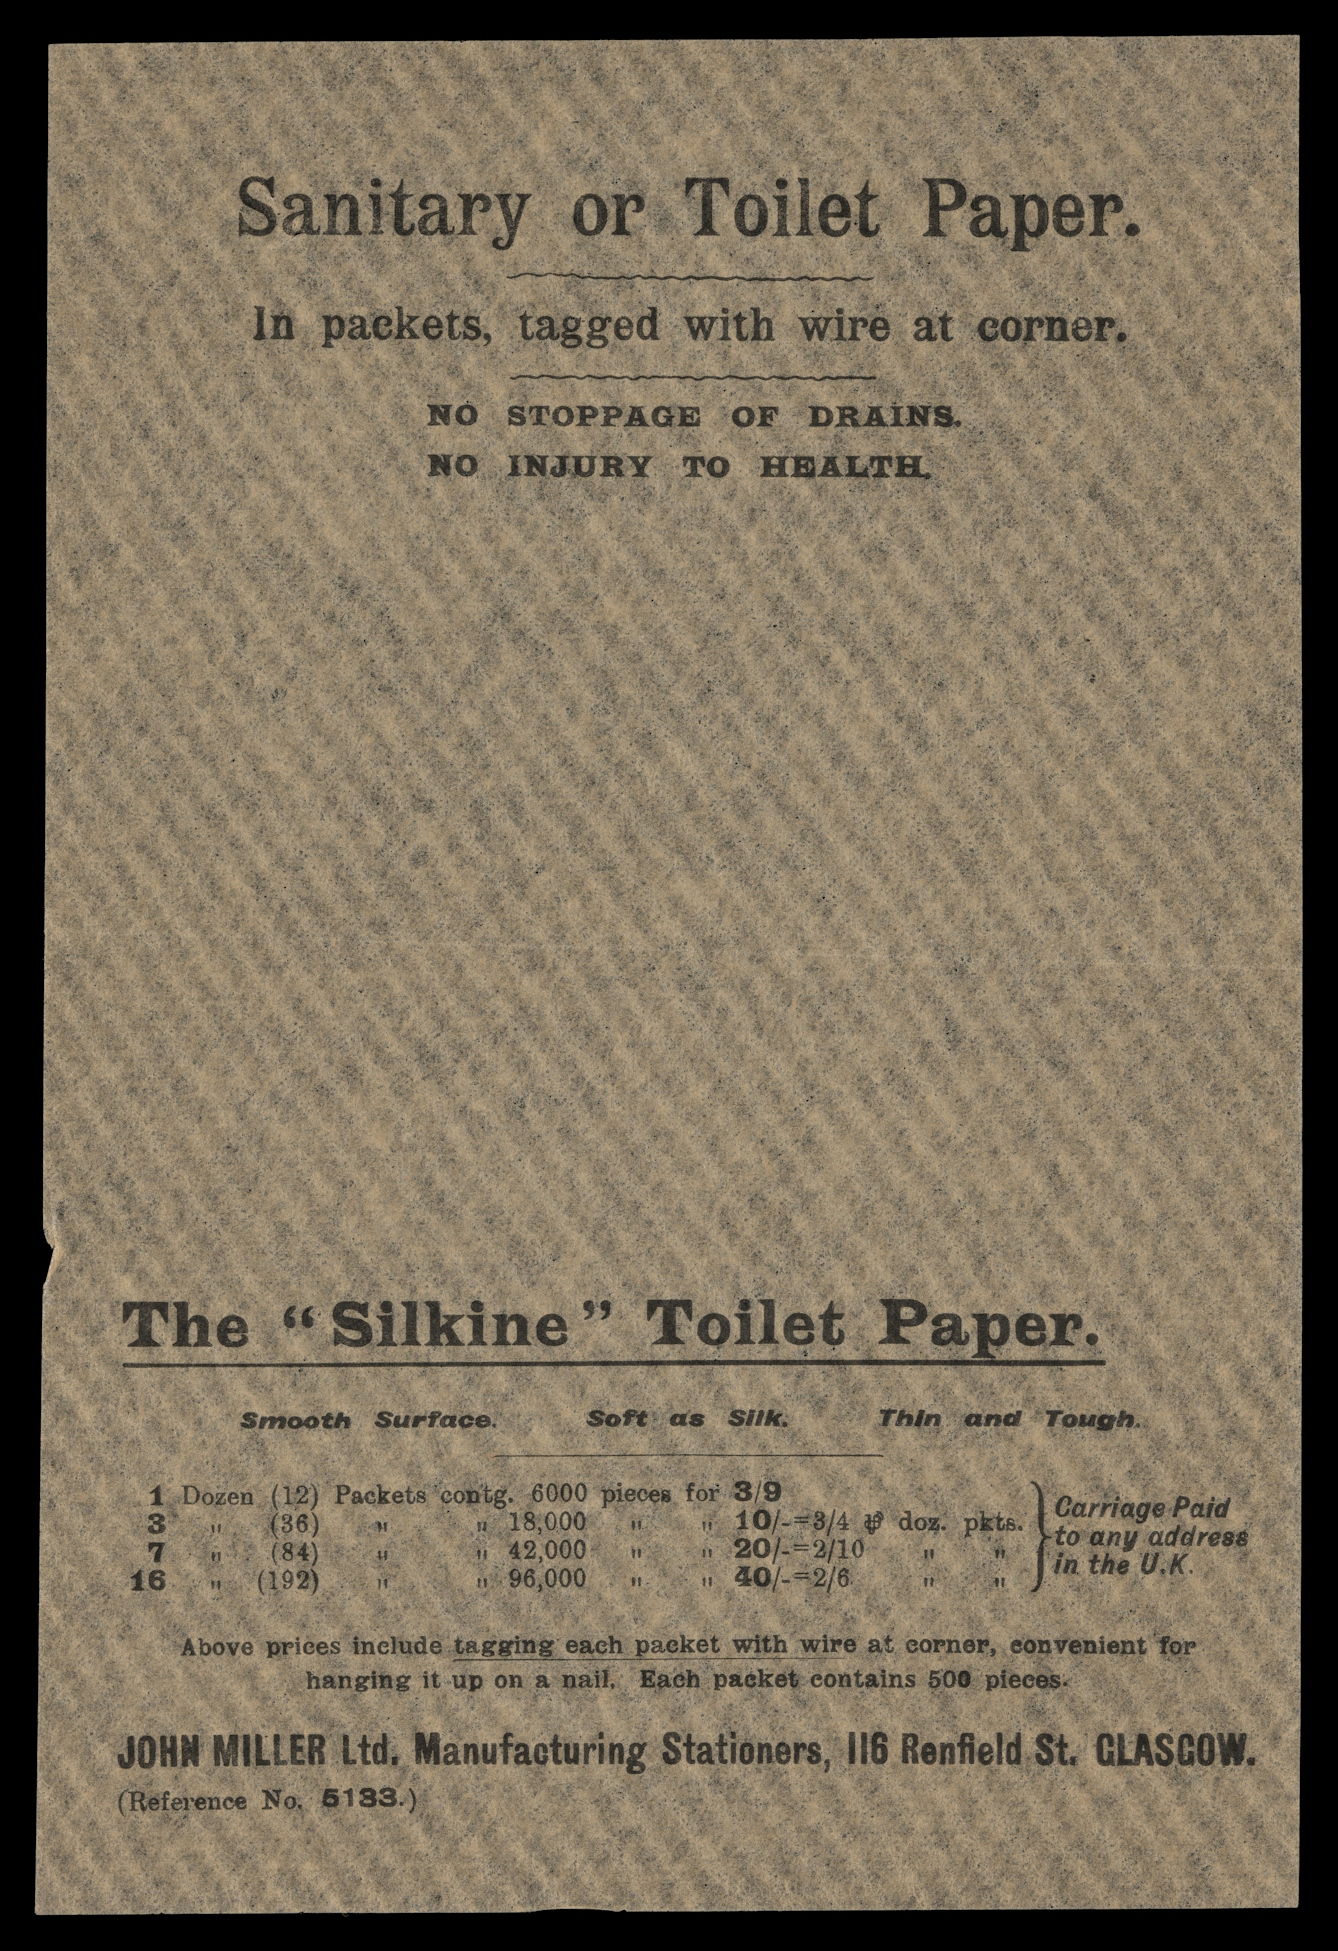 Colored Toilet Paper History: What Happened to It?